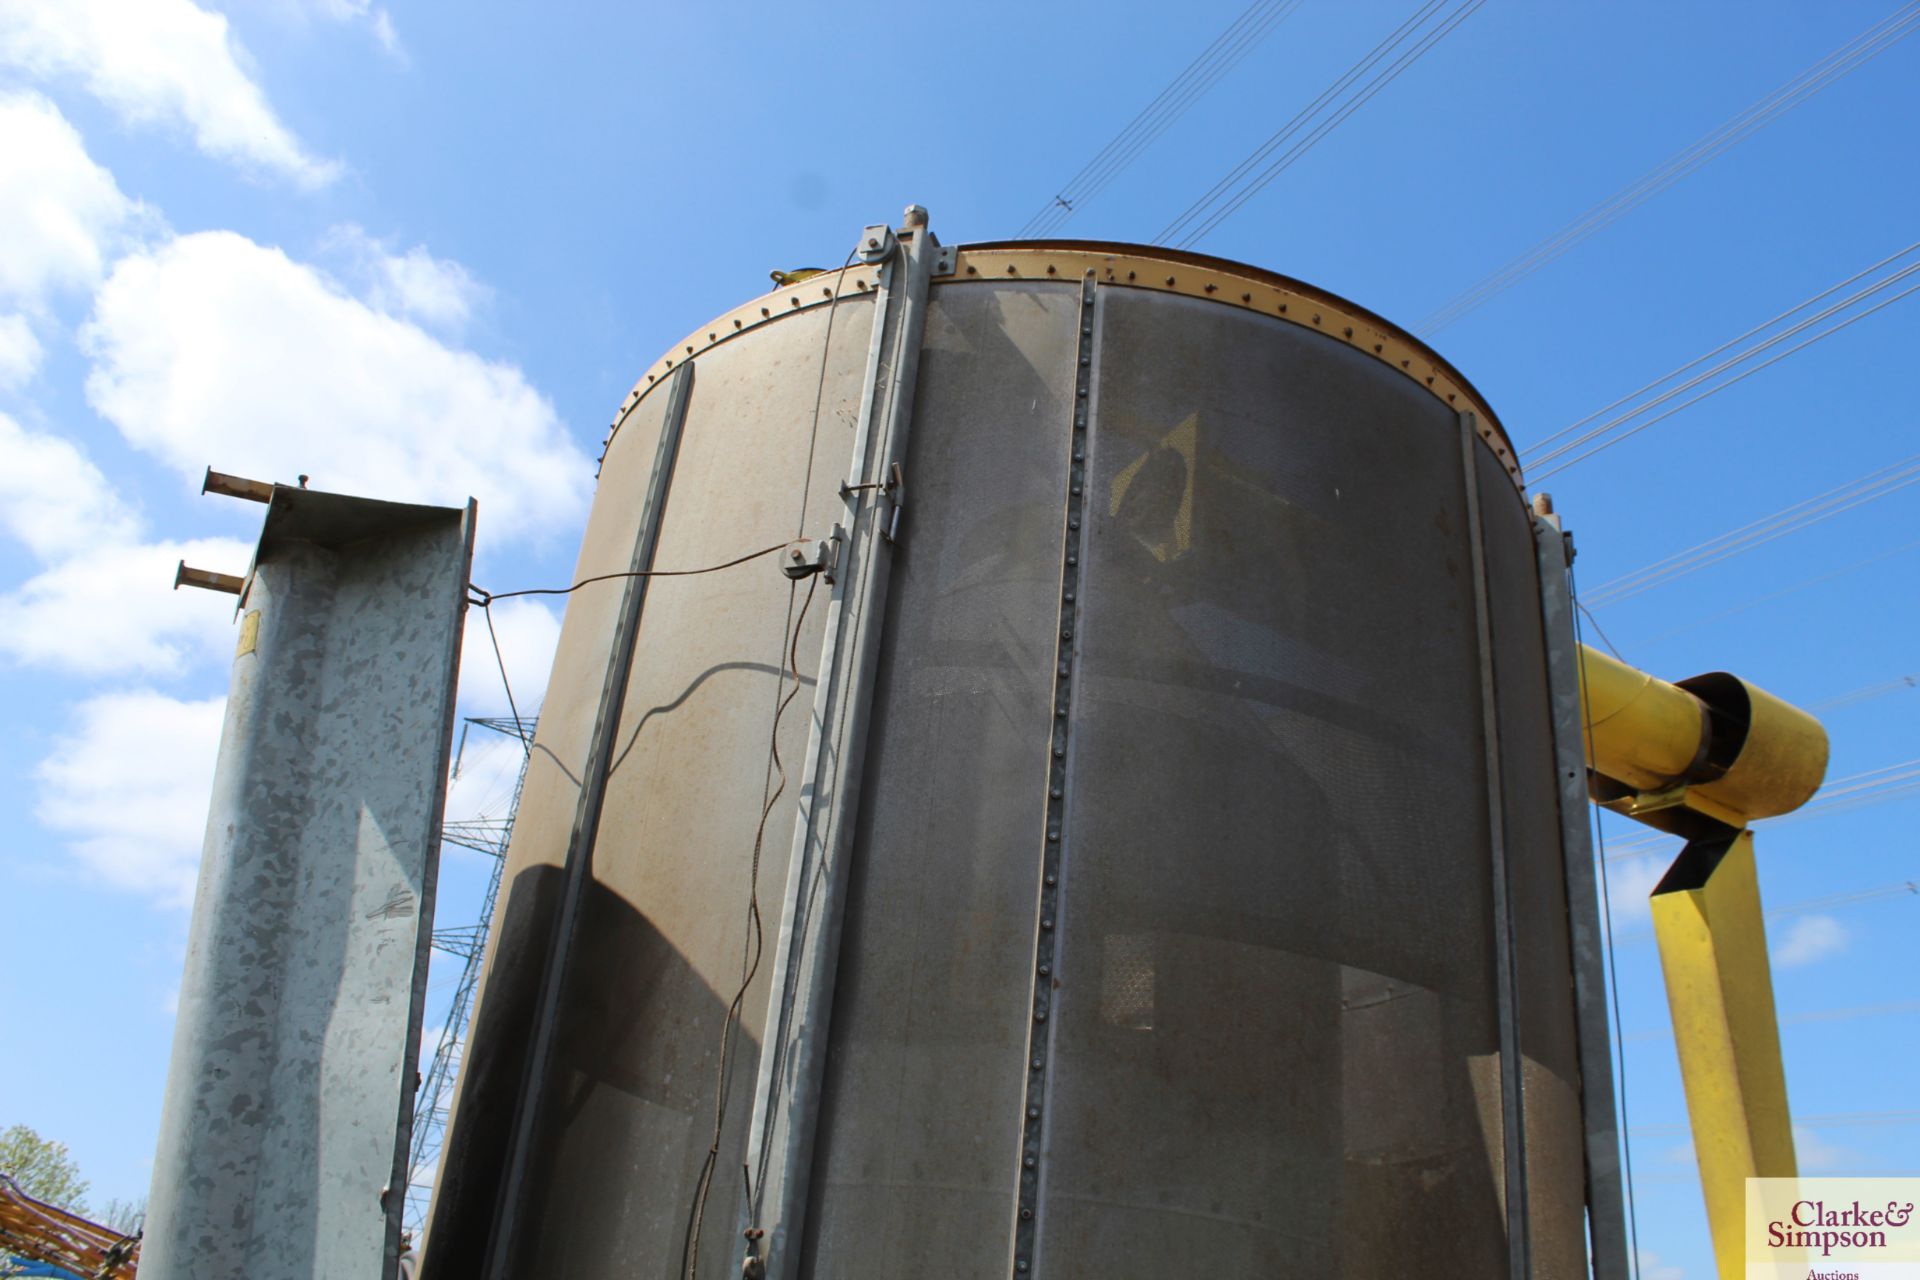 Mecmar 13T mobile grain drier. 326 hours. For sale due to retirement. V - Image 5 of 21